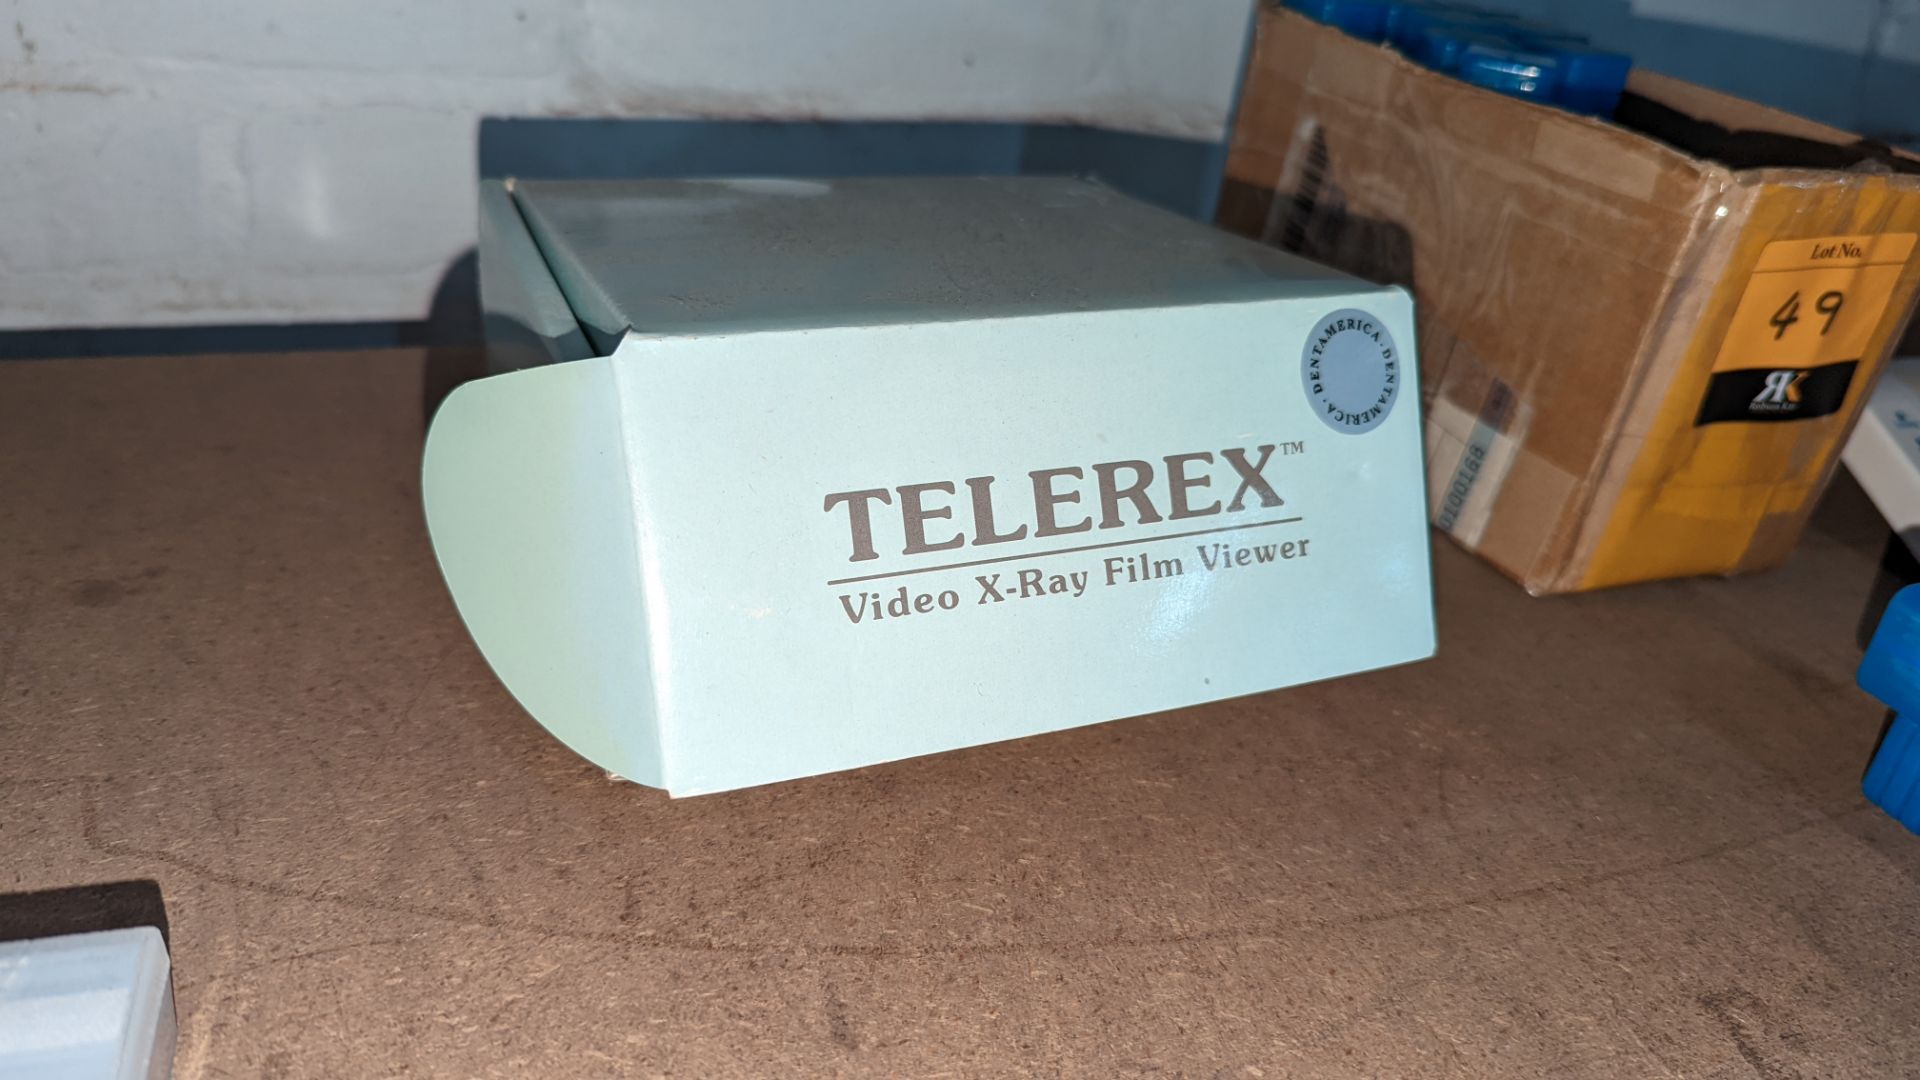 Telerex video X-ray film viewer - Image 2 of 3